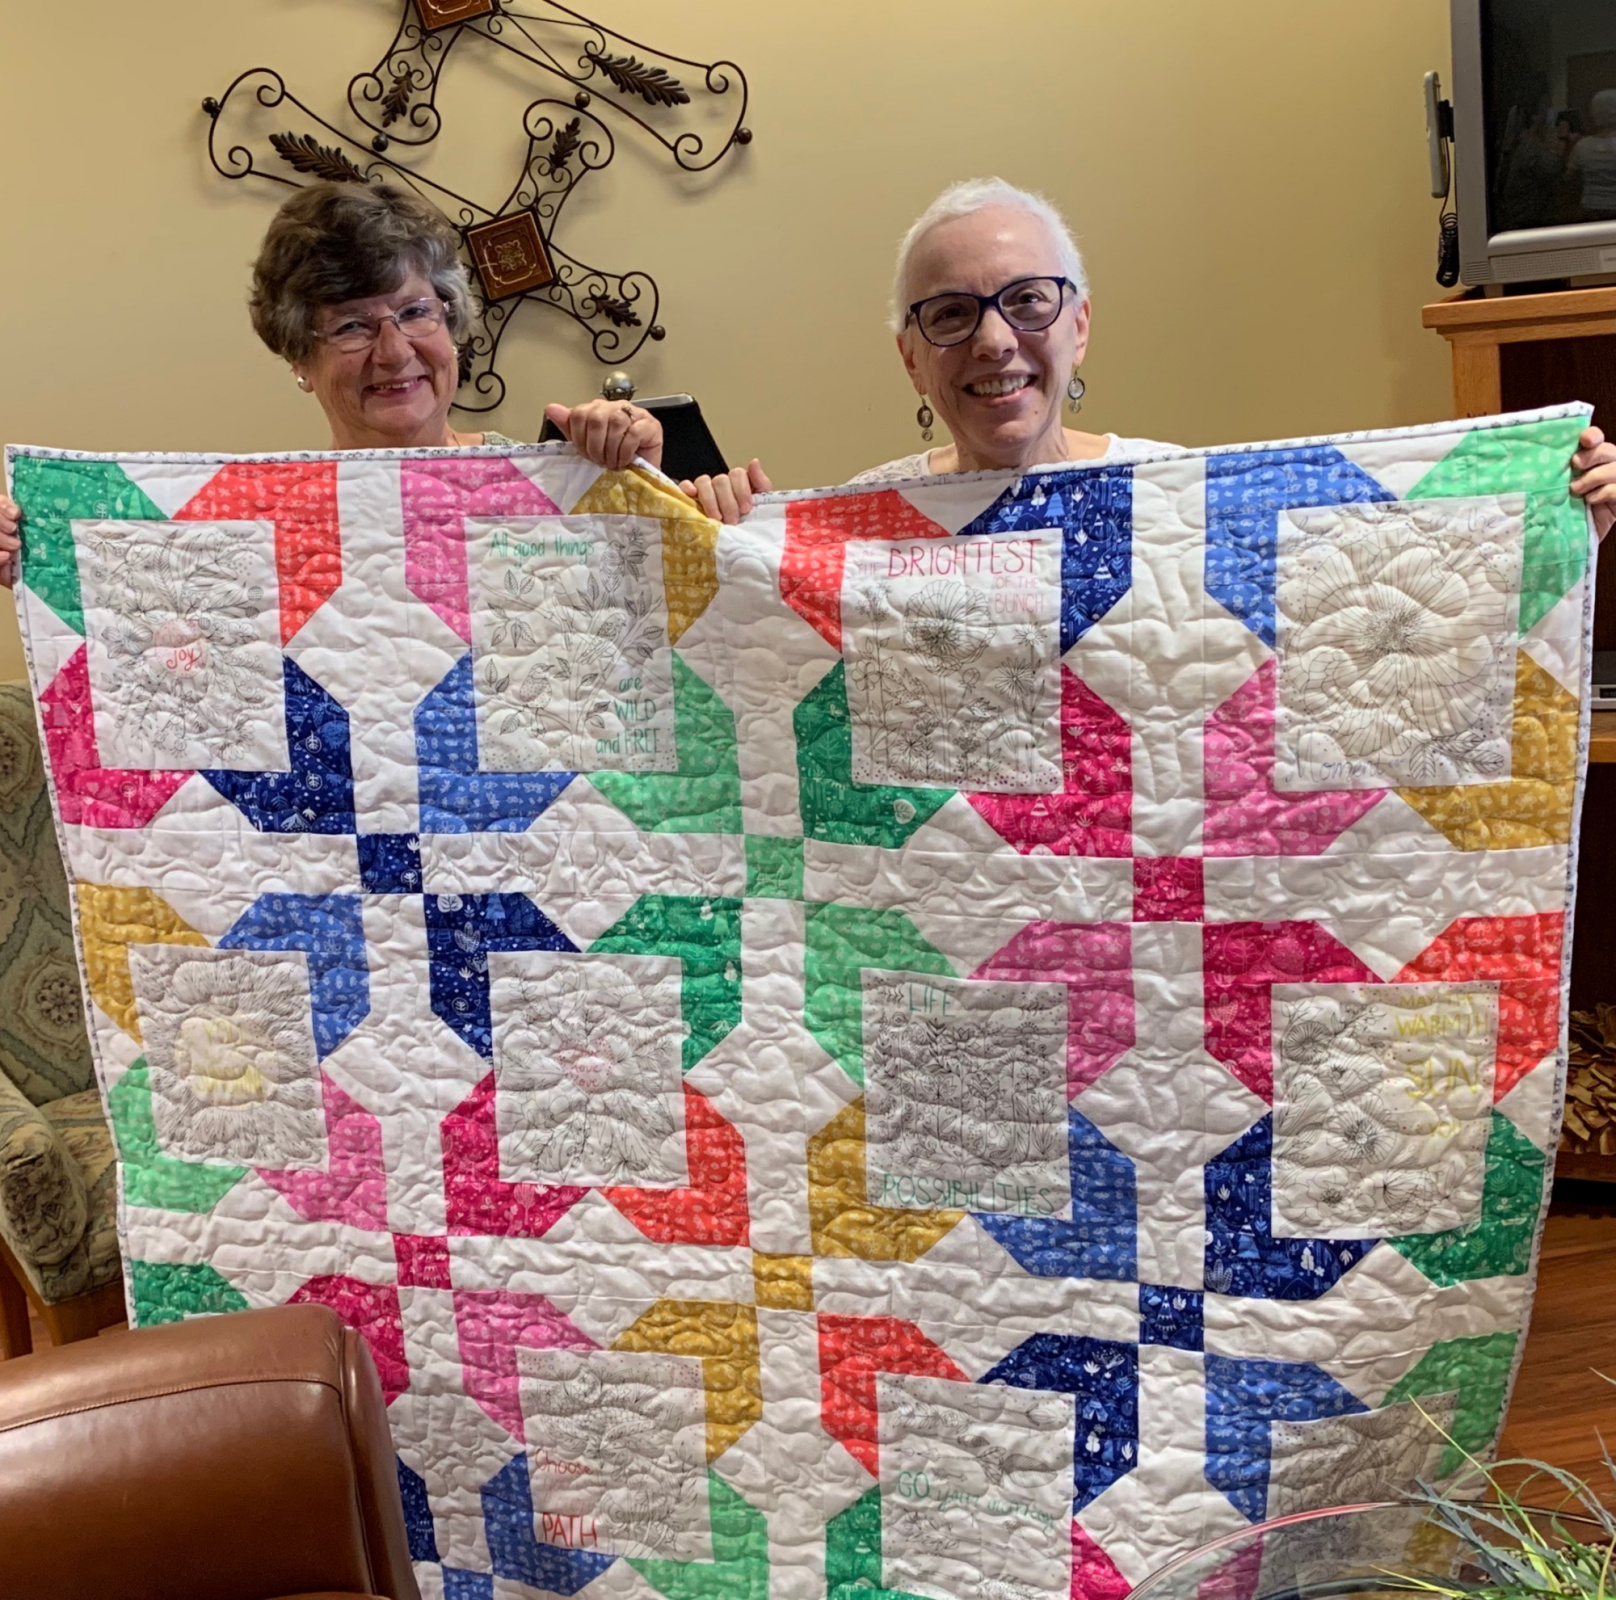 Kenda and me with the quilt she made for me. I love every stitch and I know there are prayers sewn into it. 